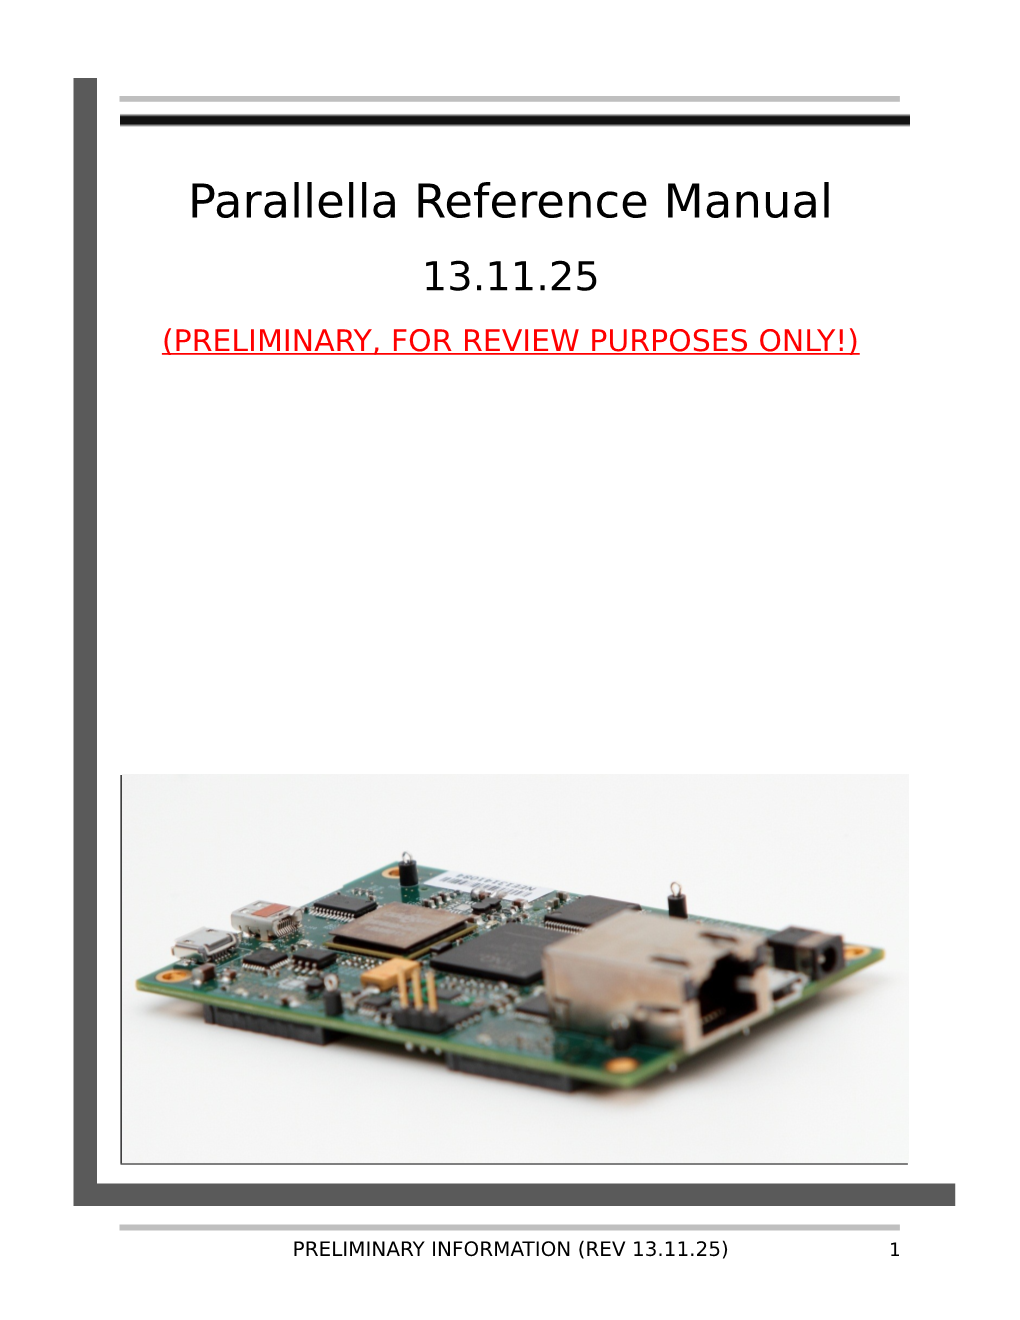 Parallella Reference Manual 13.11.25 (PRELIMINARY, for REVIEW PURPOSES ONLY!)